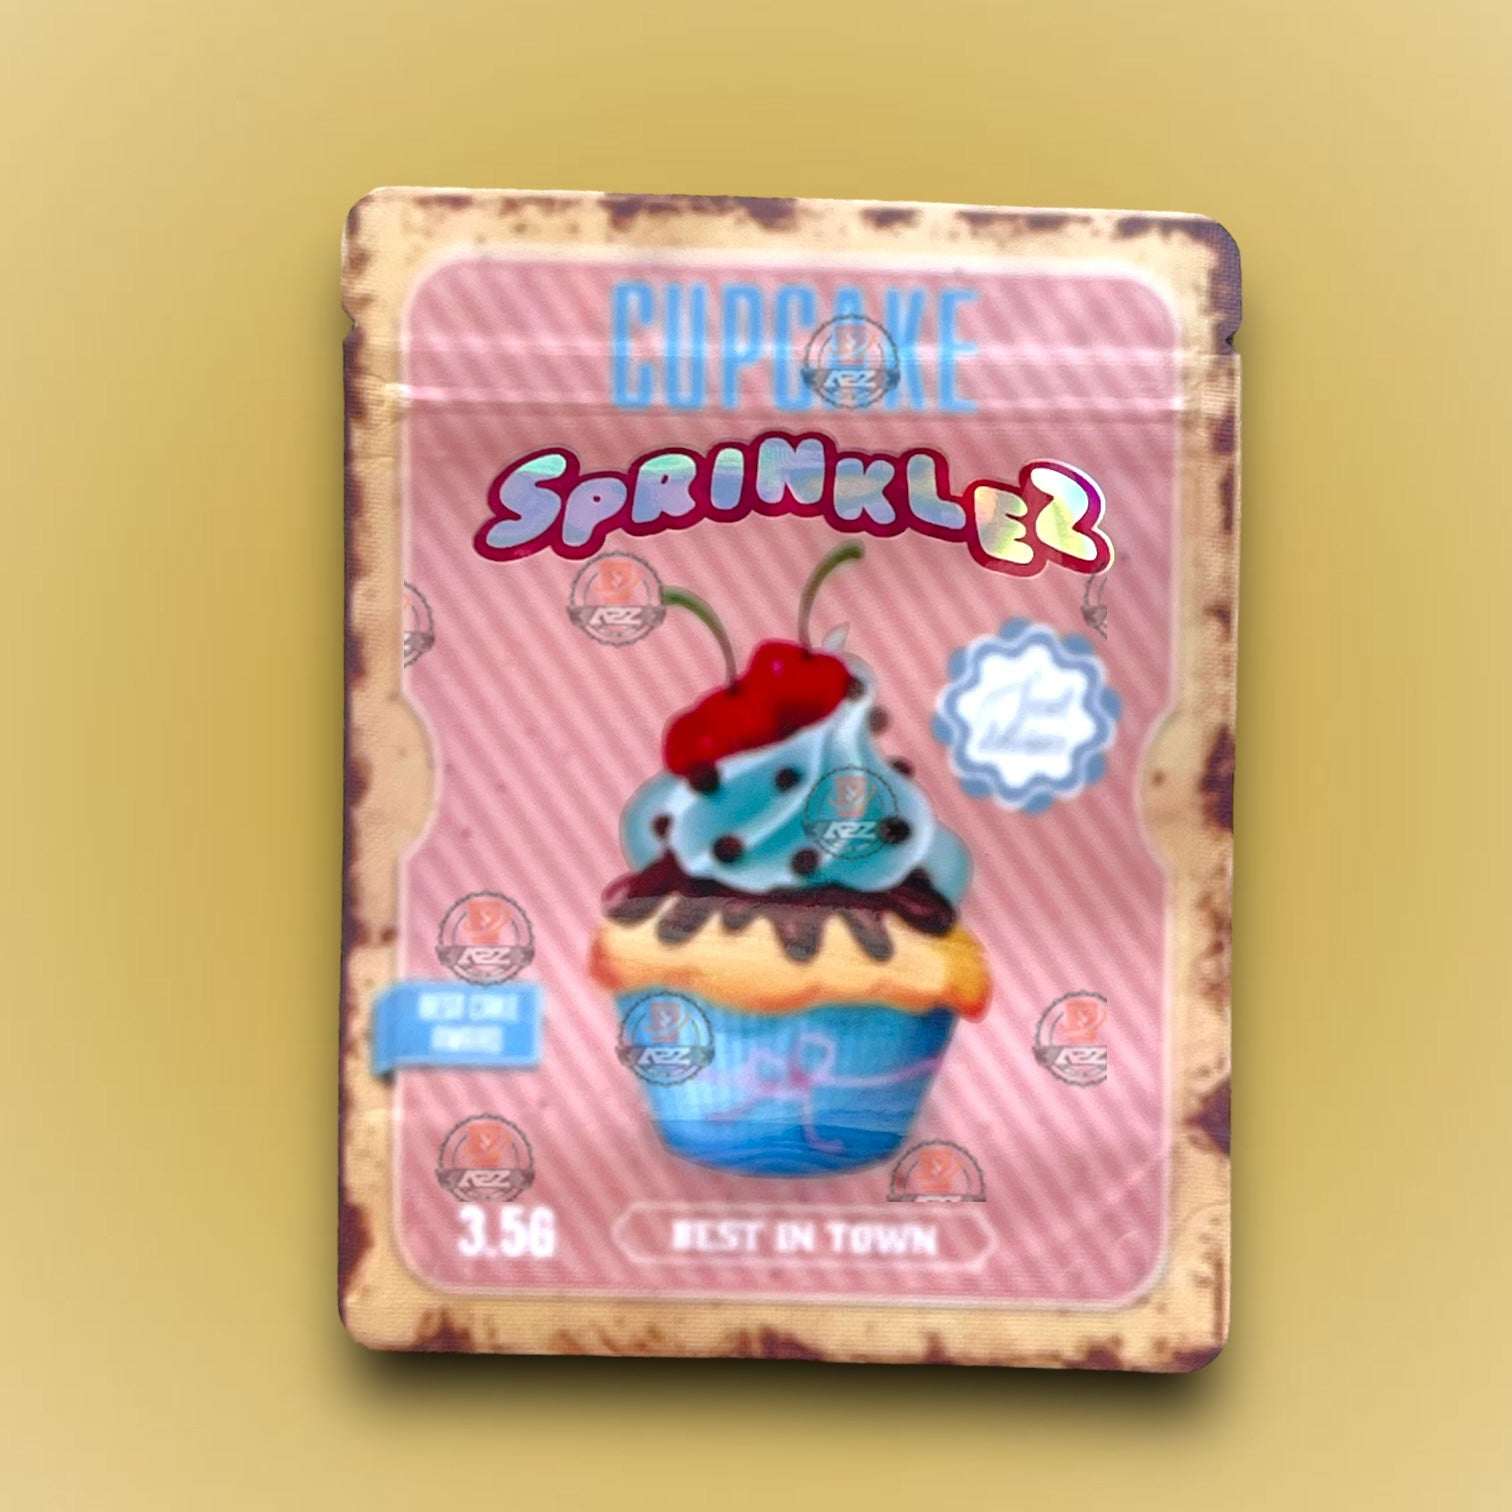 Sprinklez Cupcake 3.5G Mylar Bags- Holographic- Best in town